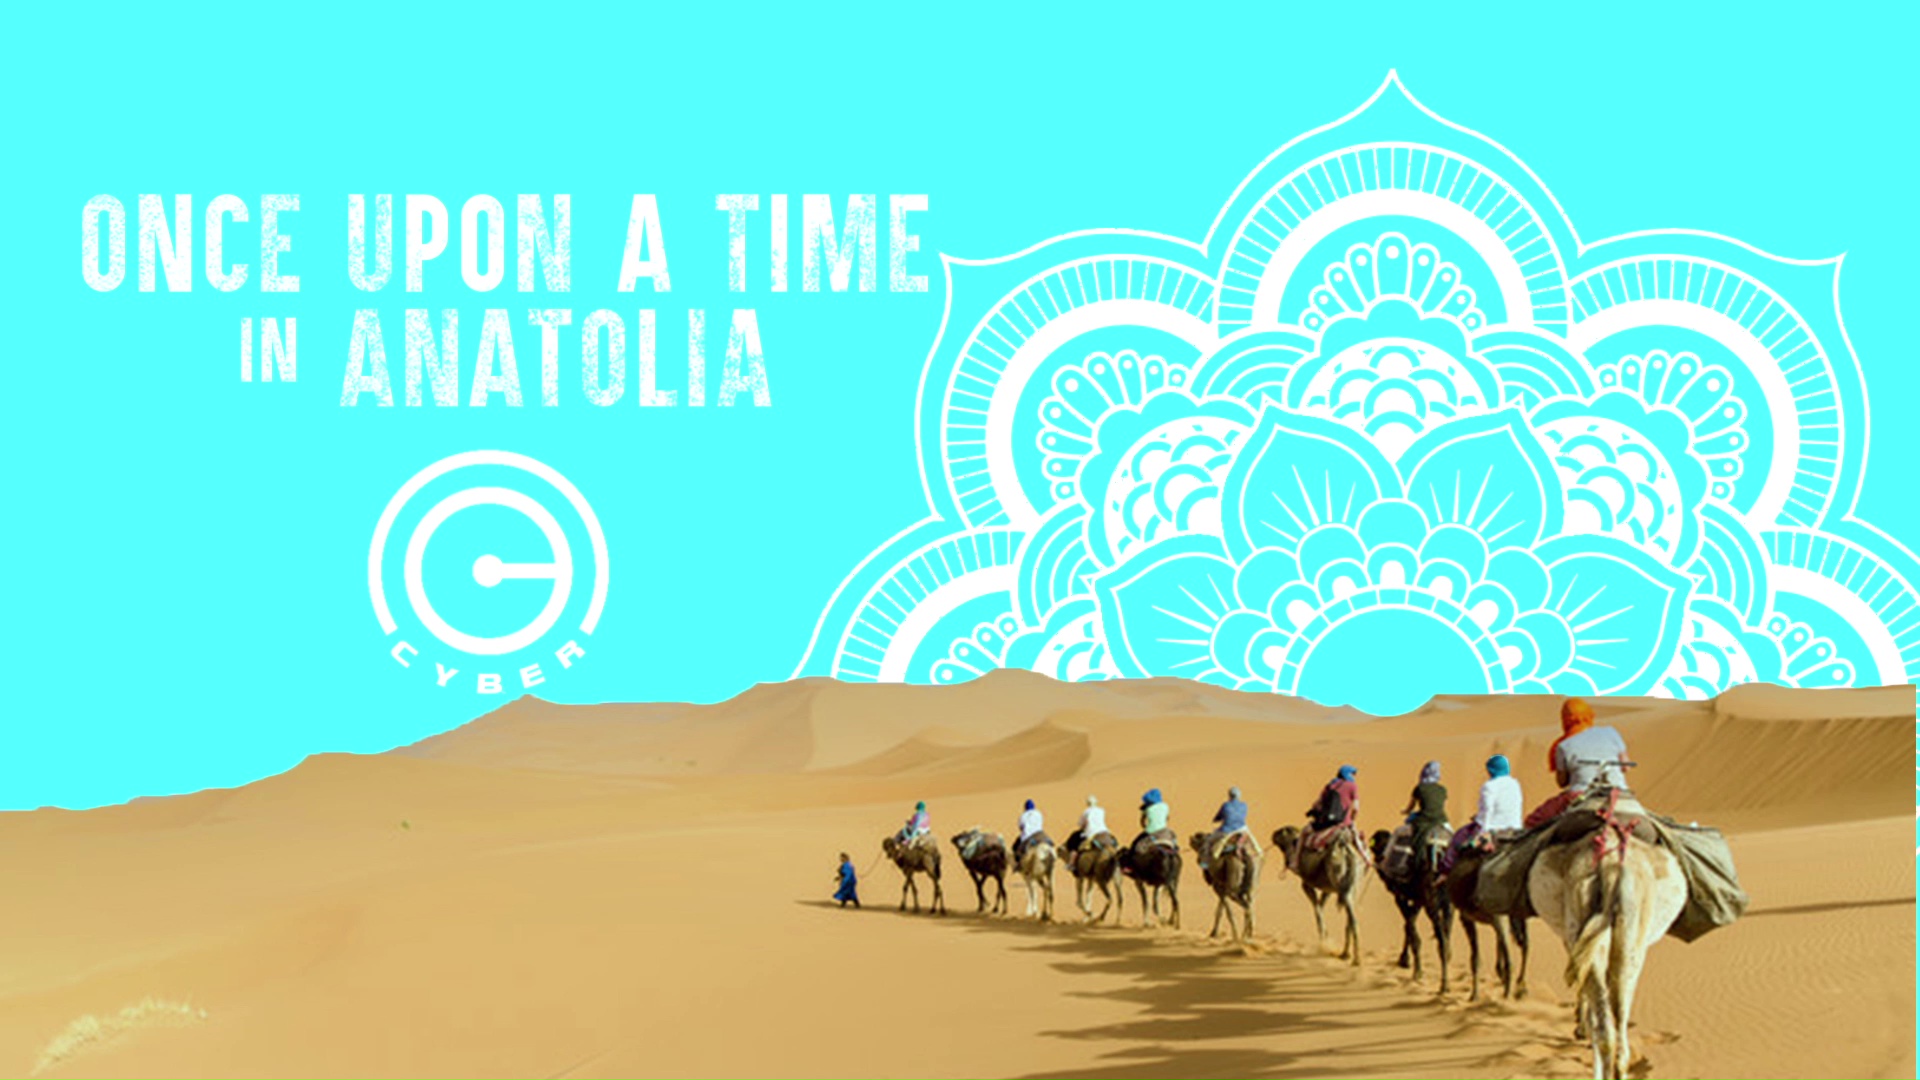 PREMIERE: ONCE UPON A TIME IN ANATOLIA